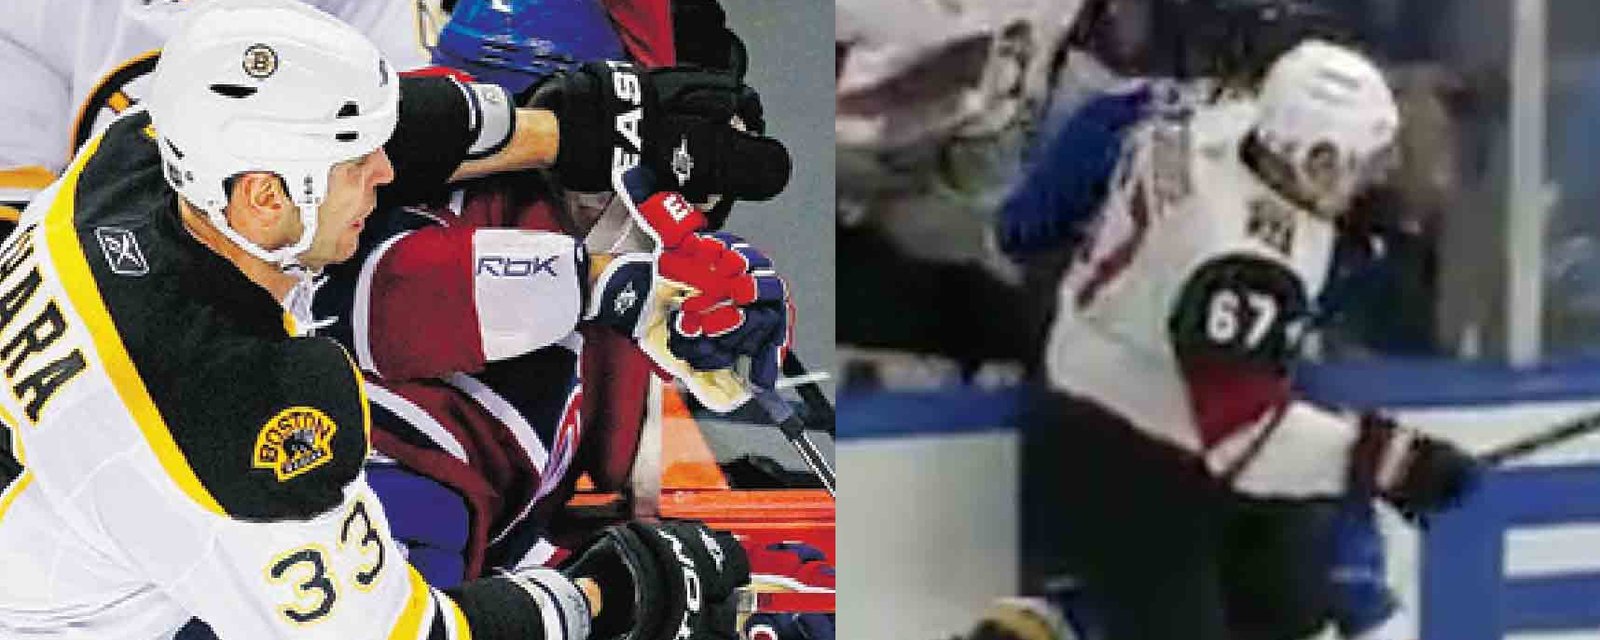 Schenn gets his face smashed into boards in incident that reminds many of the Pacioretty hit! 